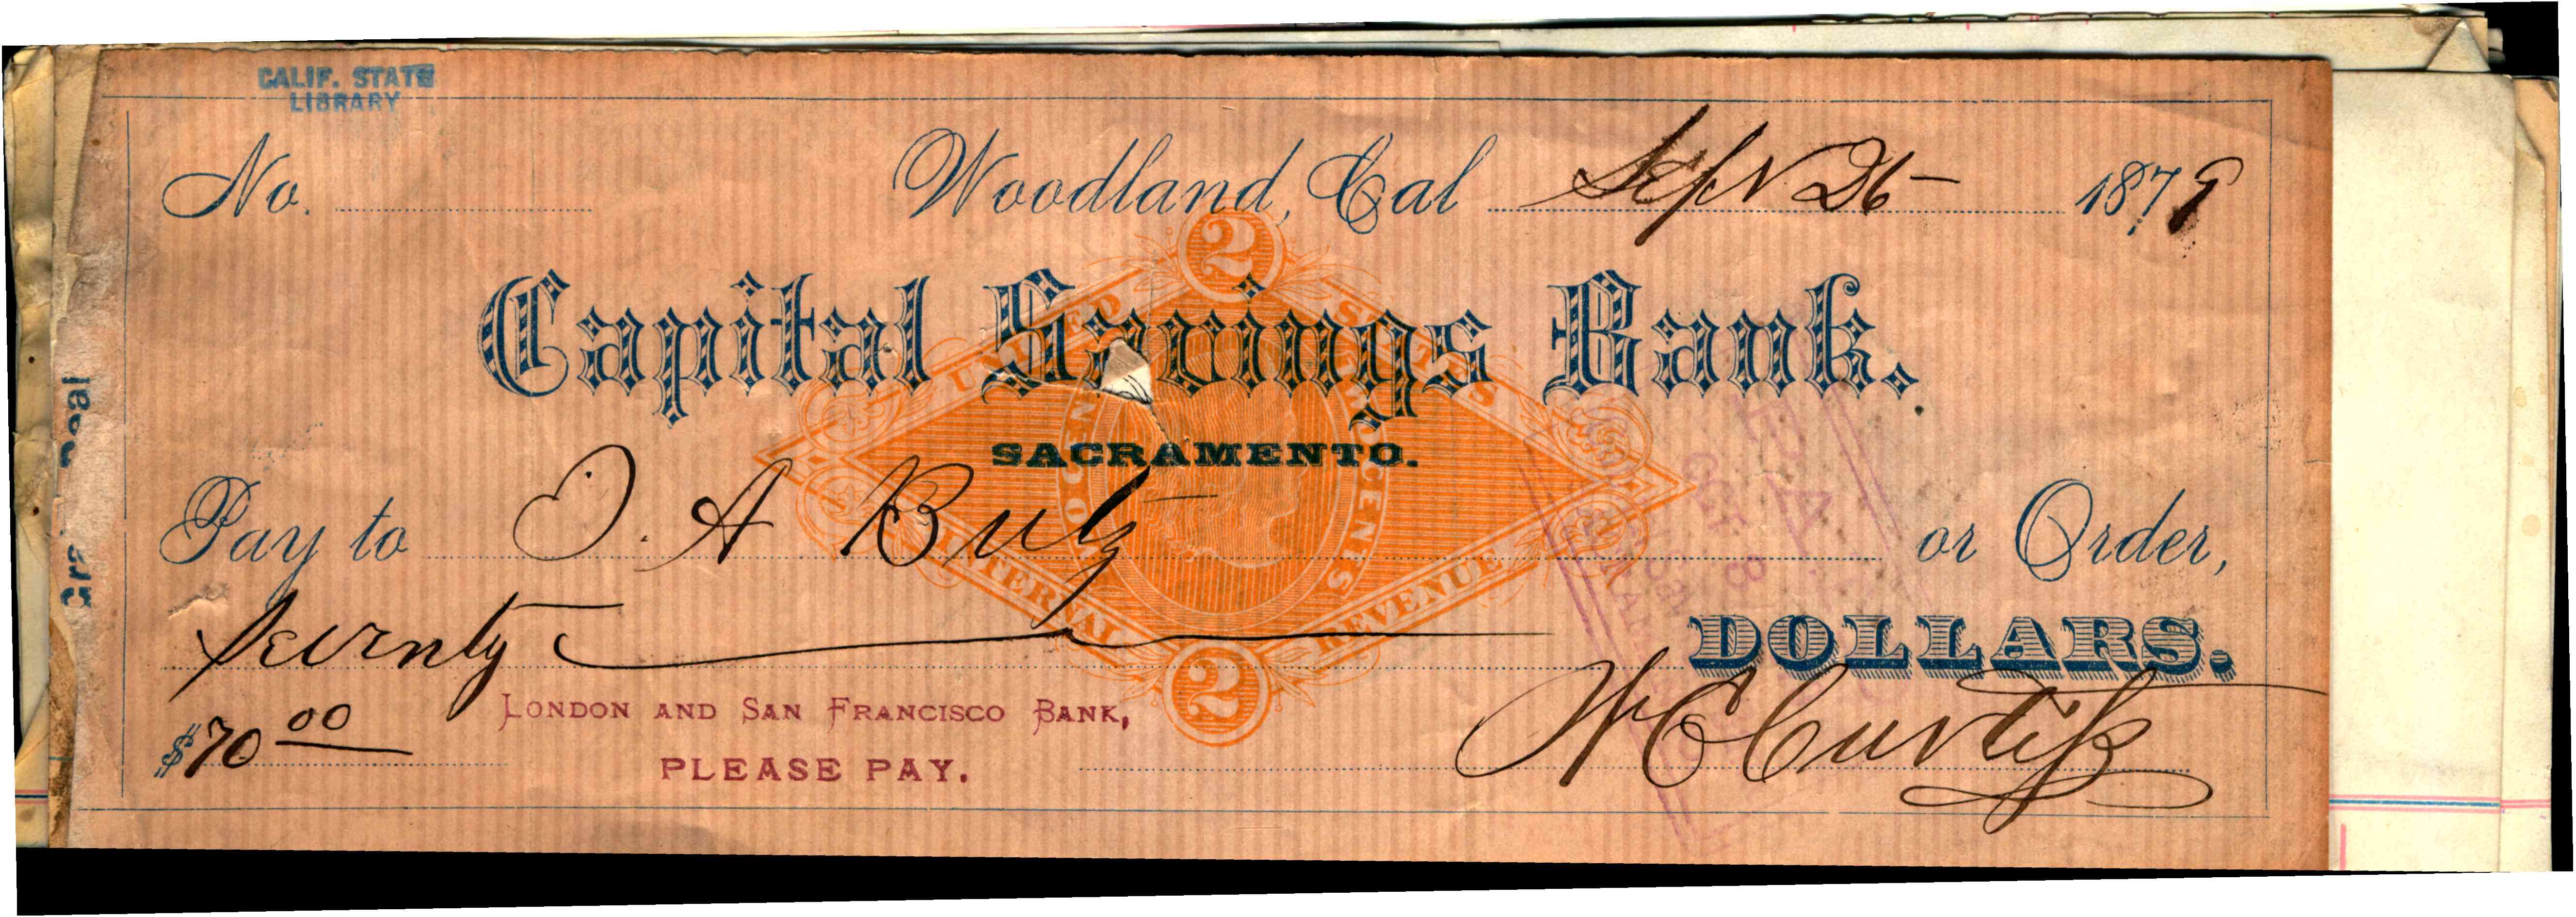 London and San Francisco Bank in red ink on receipt